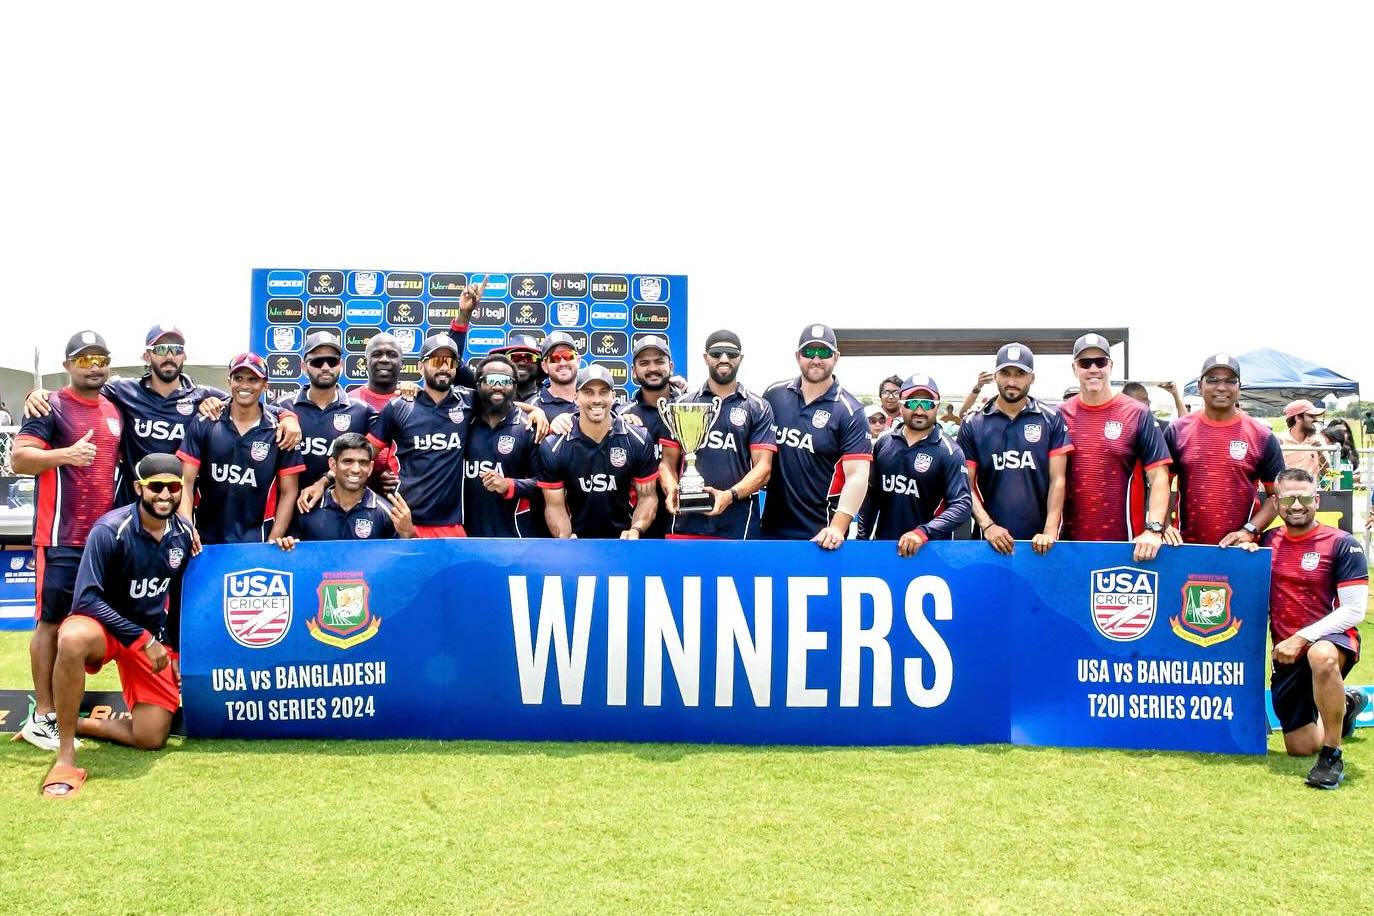 The US team won their series against Bangladesh 2-1 last week and are firmly back in the international fold